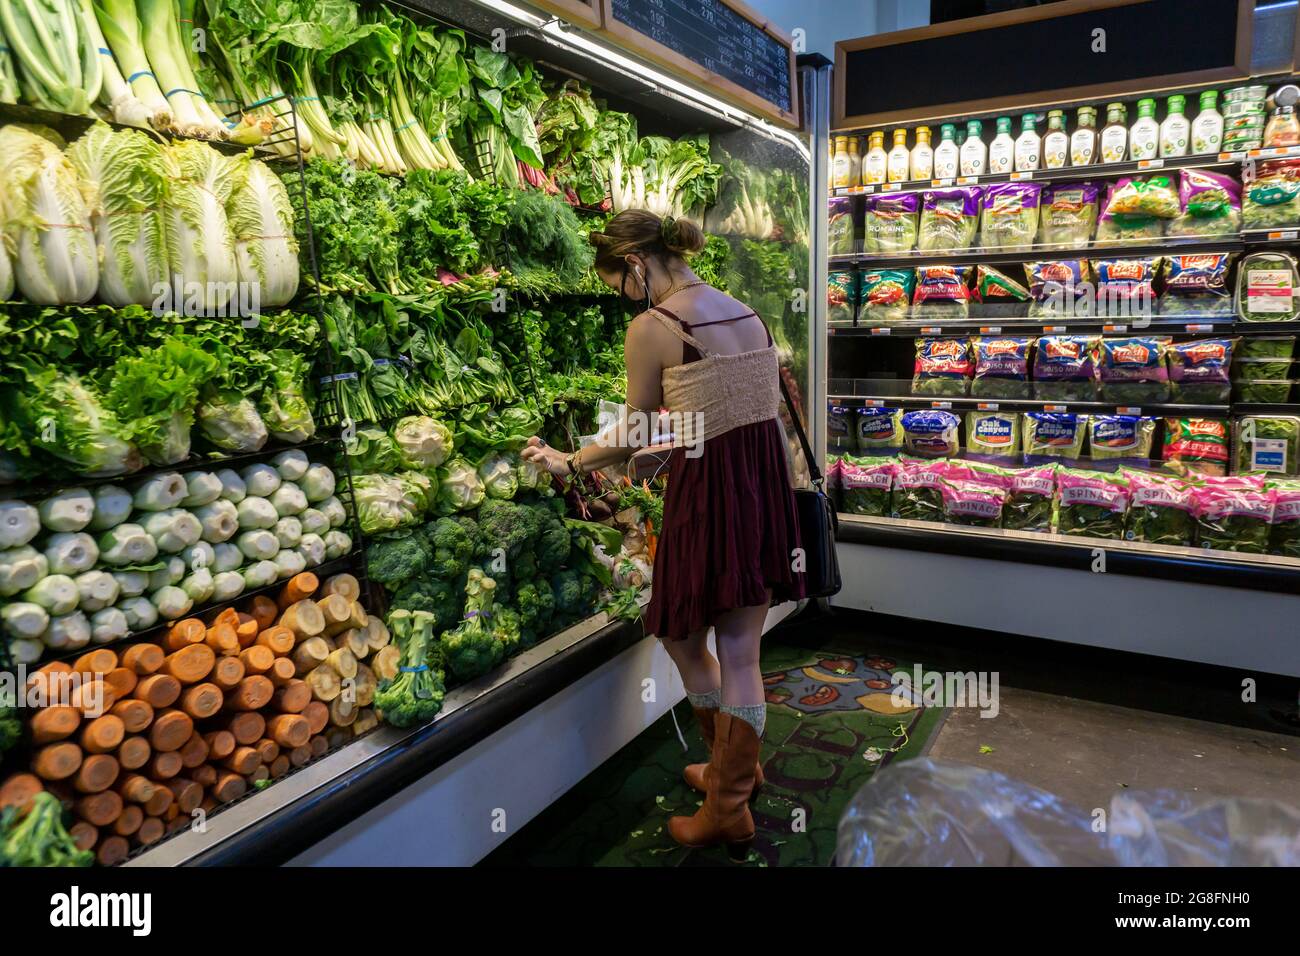 A woman shops in the produce department of a supermarket in New York on Monday, July 19, 2021. (© Richard B. Levine) Stock Photo